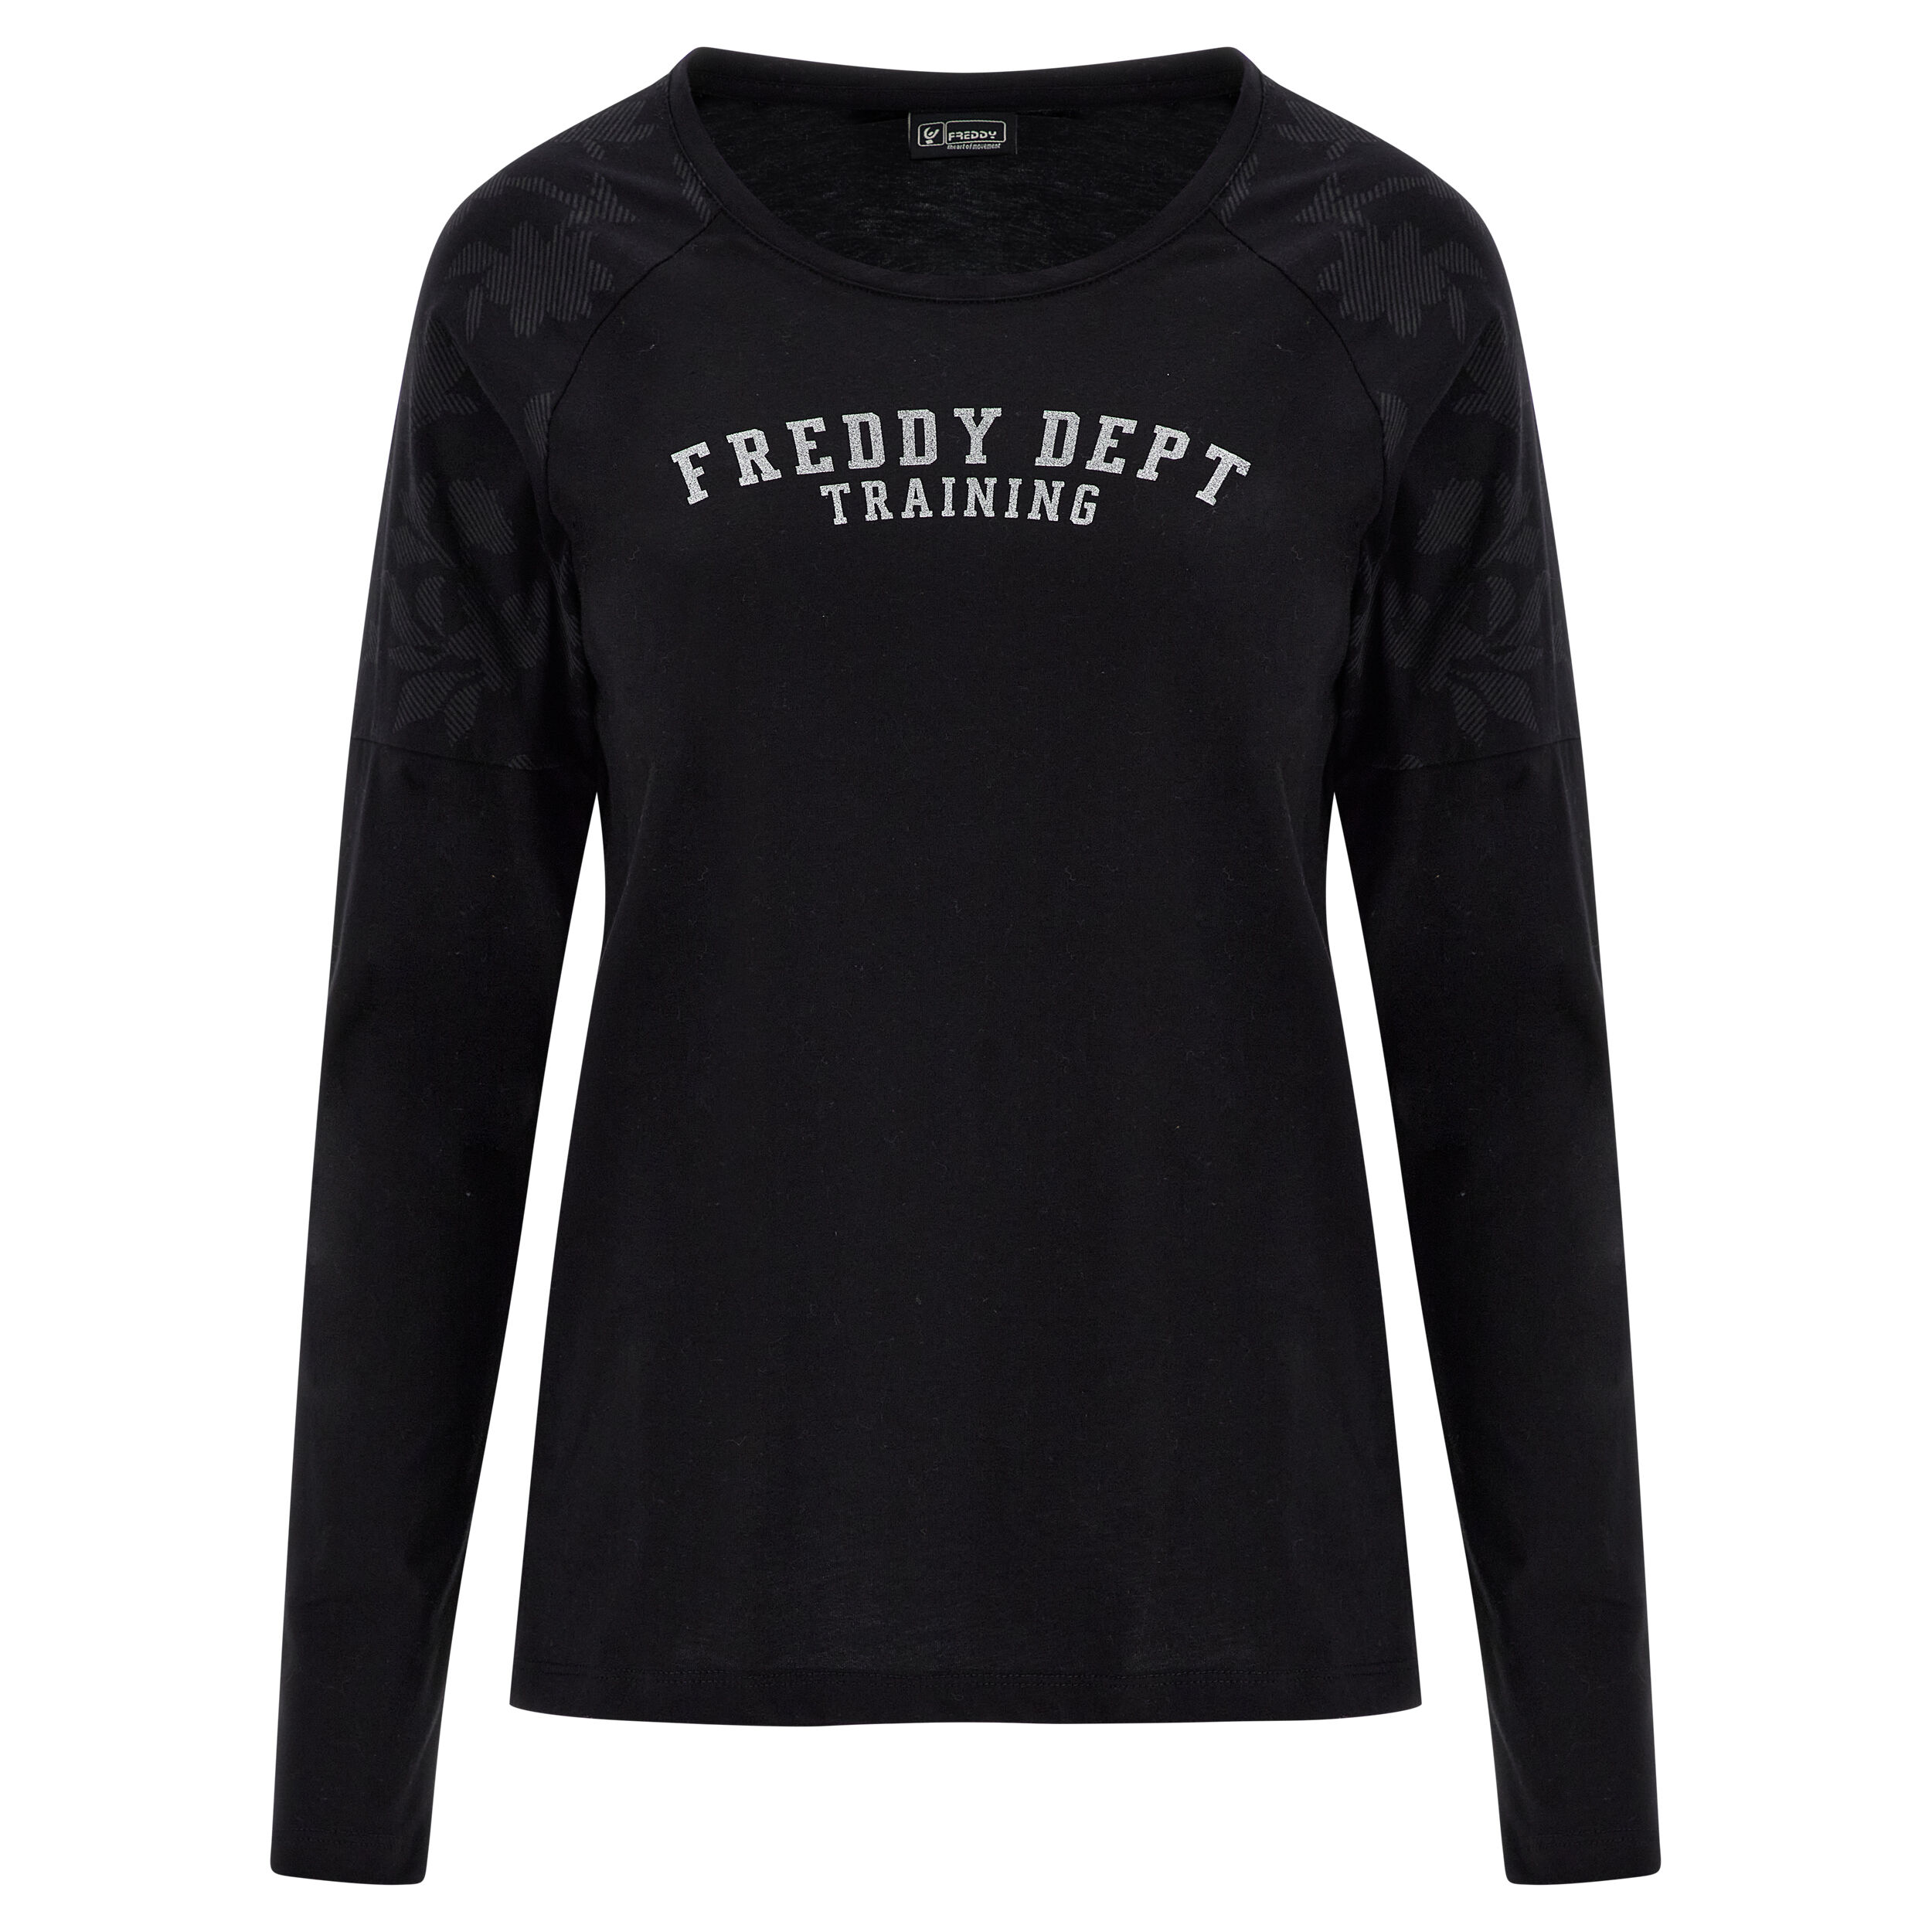 Freddy T-shirt manica lunga con inserti su spalle stampa floreale Black-Allover Flower Black Donna Extra Large